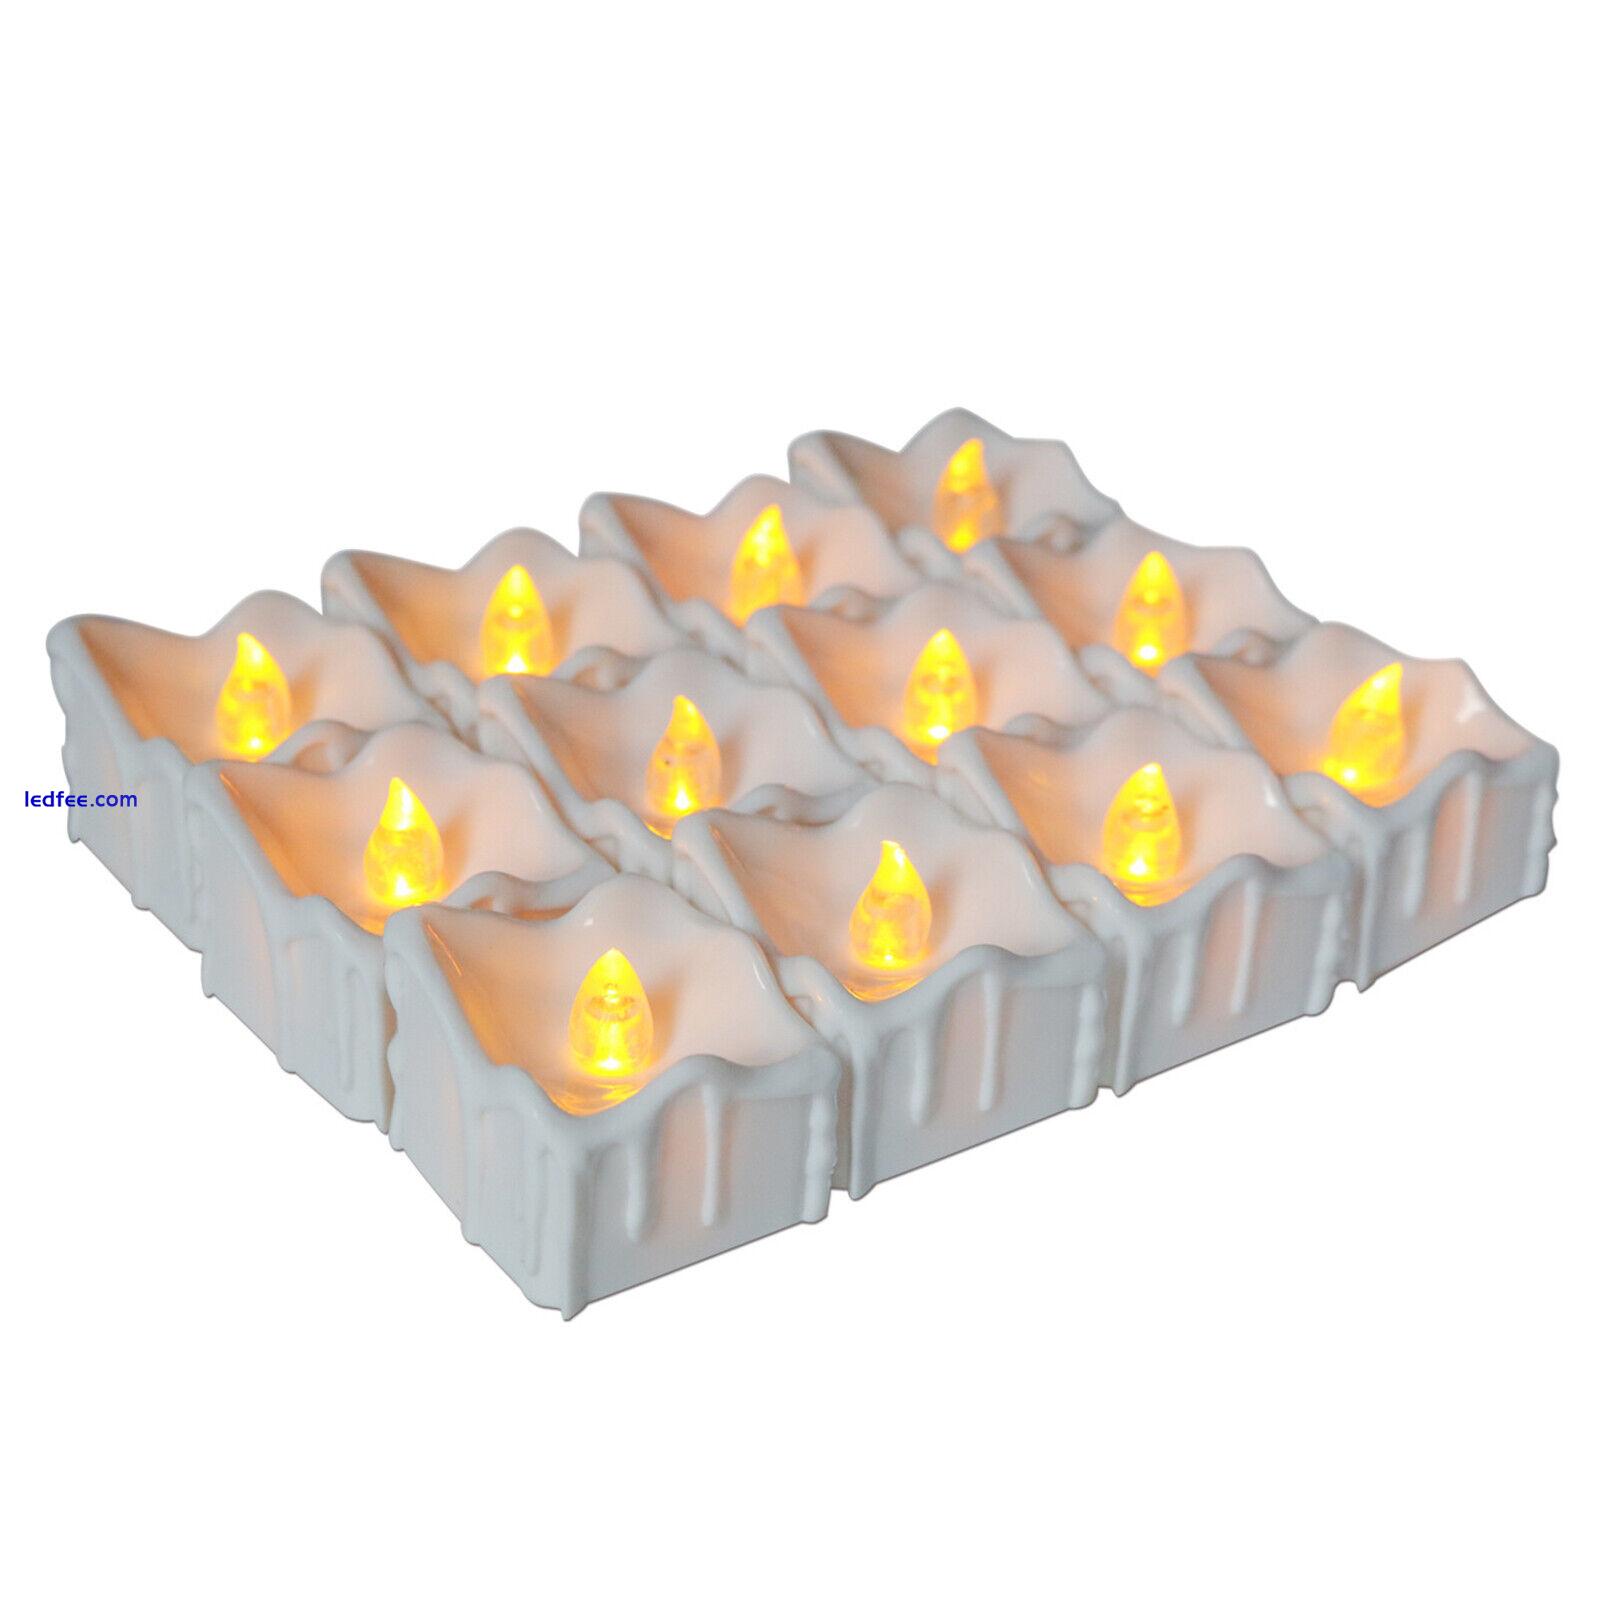 uk Flameless LED Candles Tea Light Romantic Candles Lights for Home (Square) 5 